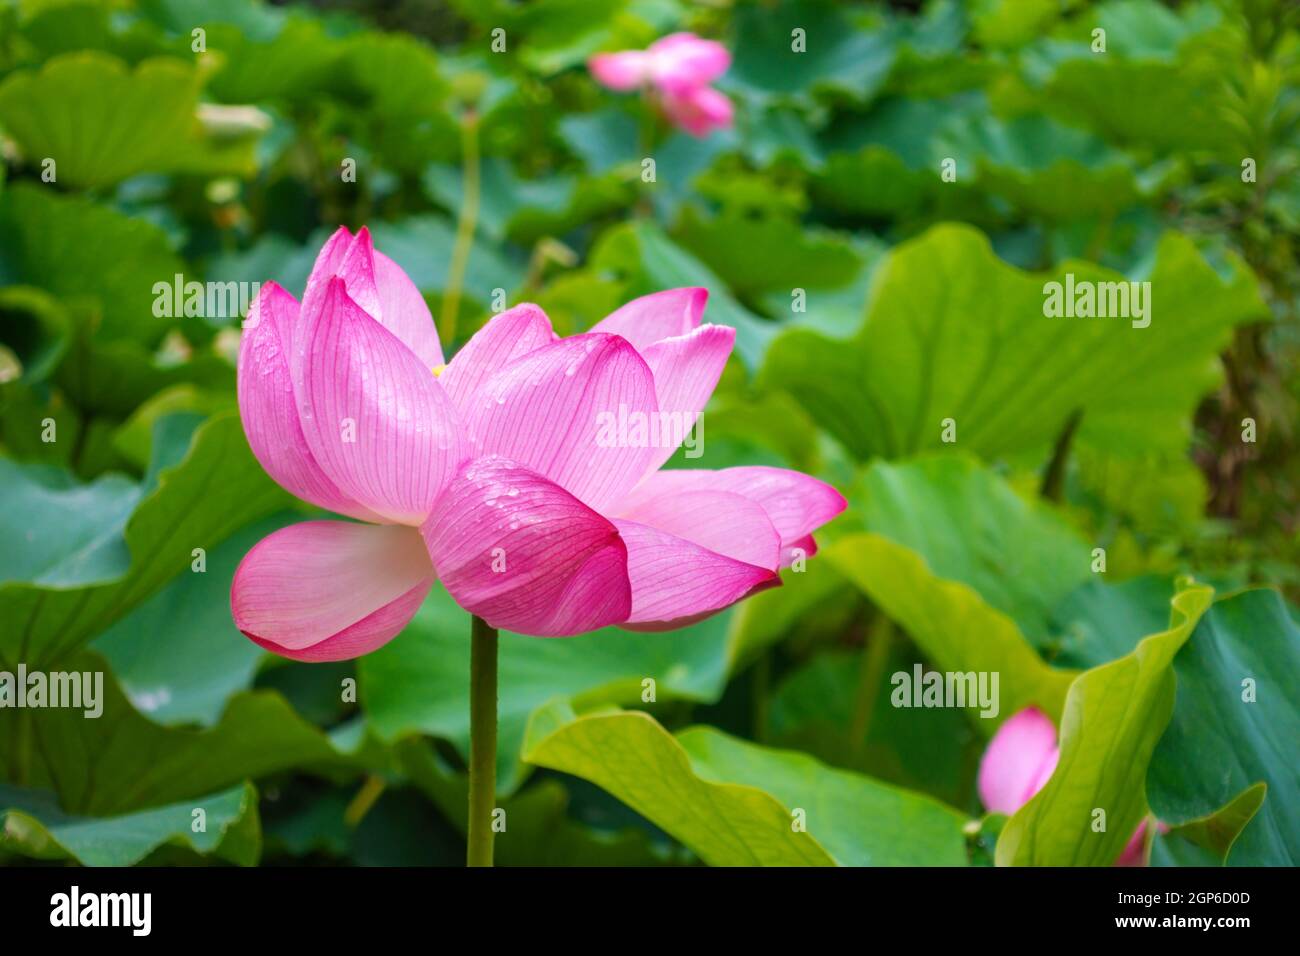 beautiful blooming pink lotus flower over green leaves nature background Stock Photo